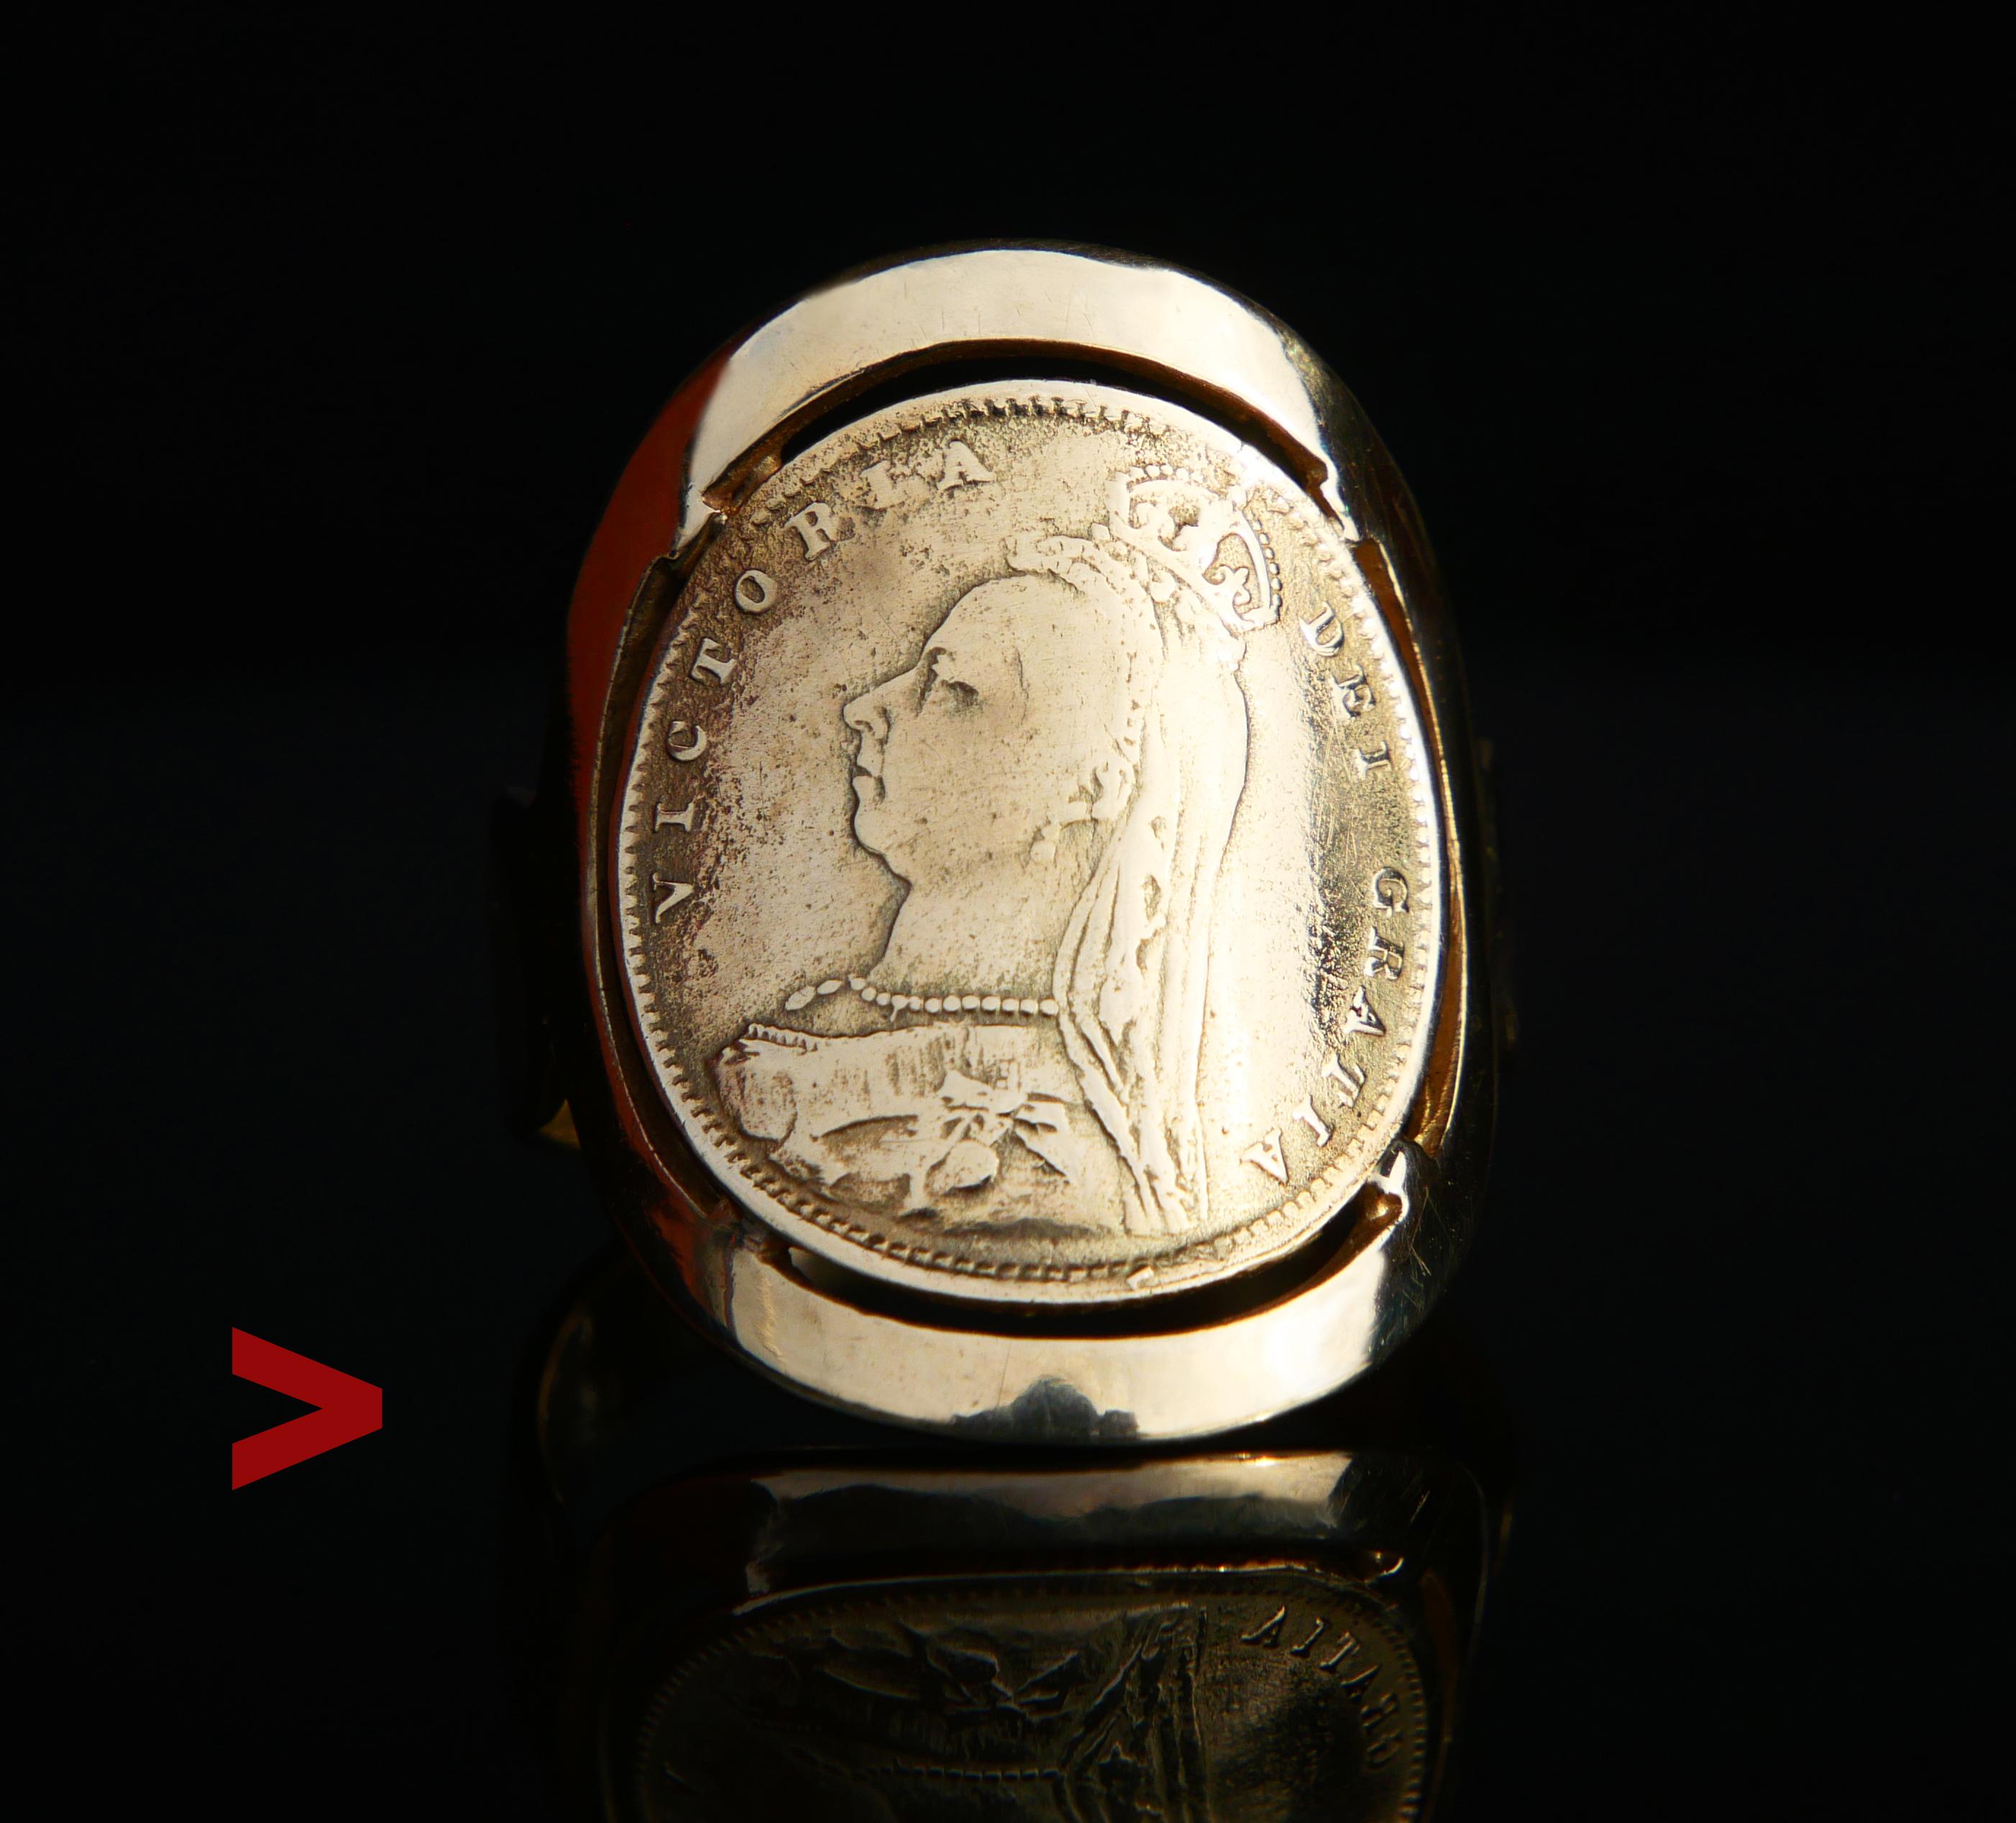 Antique Coin Ring skillfully crafted of a copy of 1887 British Gold Half Sovereign coin and wide band. Both the band and the coin are made of solid 14K Gold (tested). Hallmarked 585.

It was made to fit the shapes of a human finger for the best